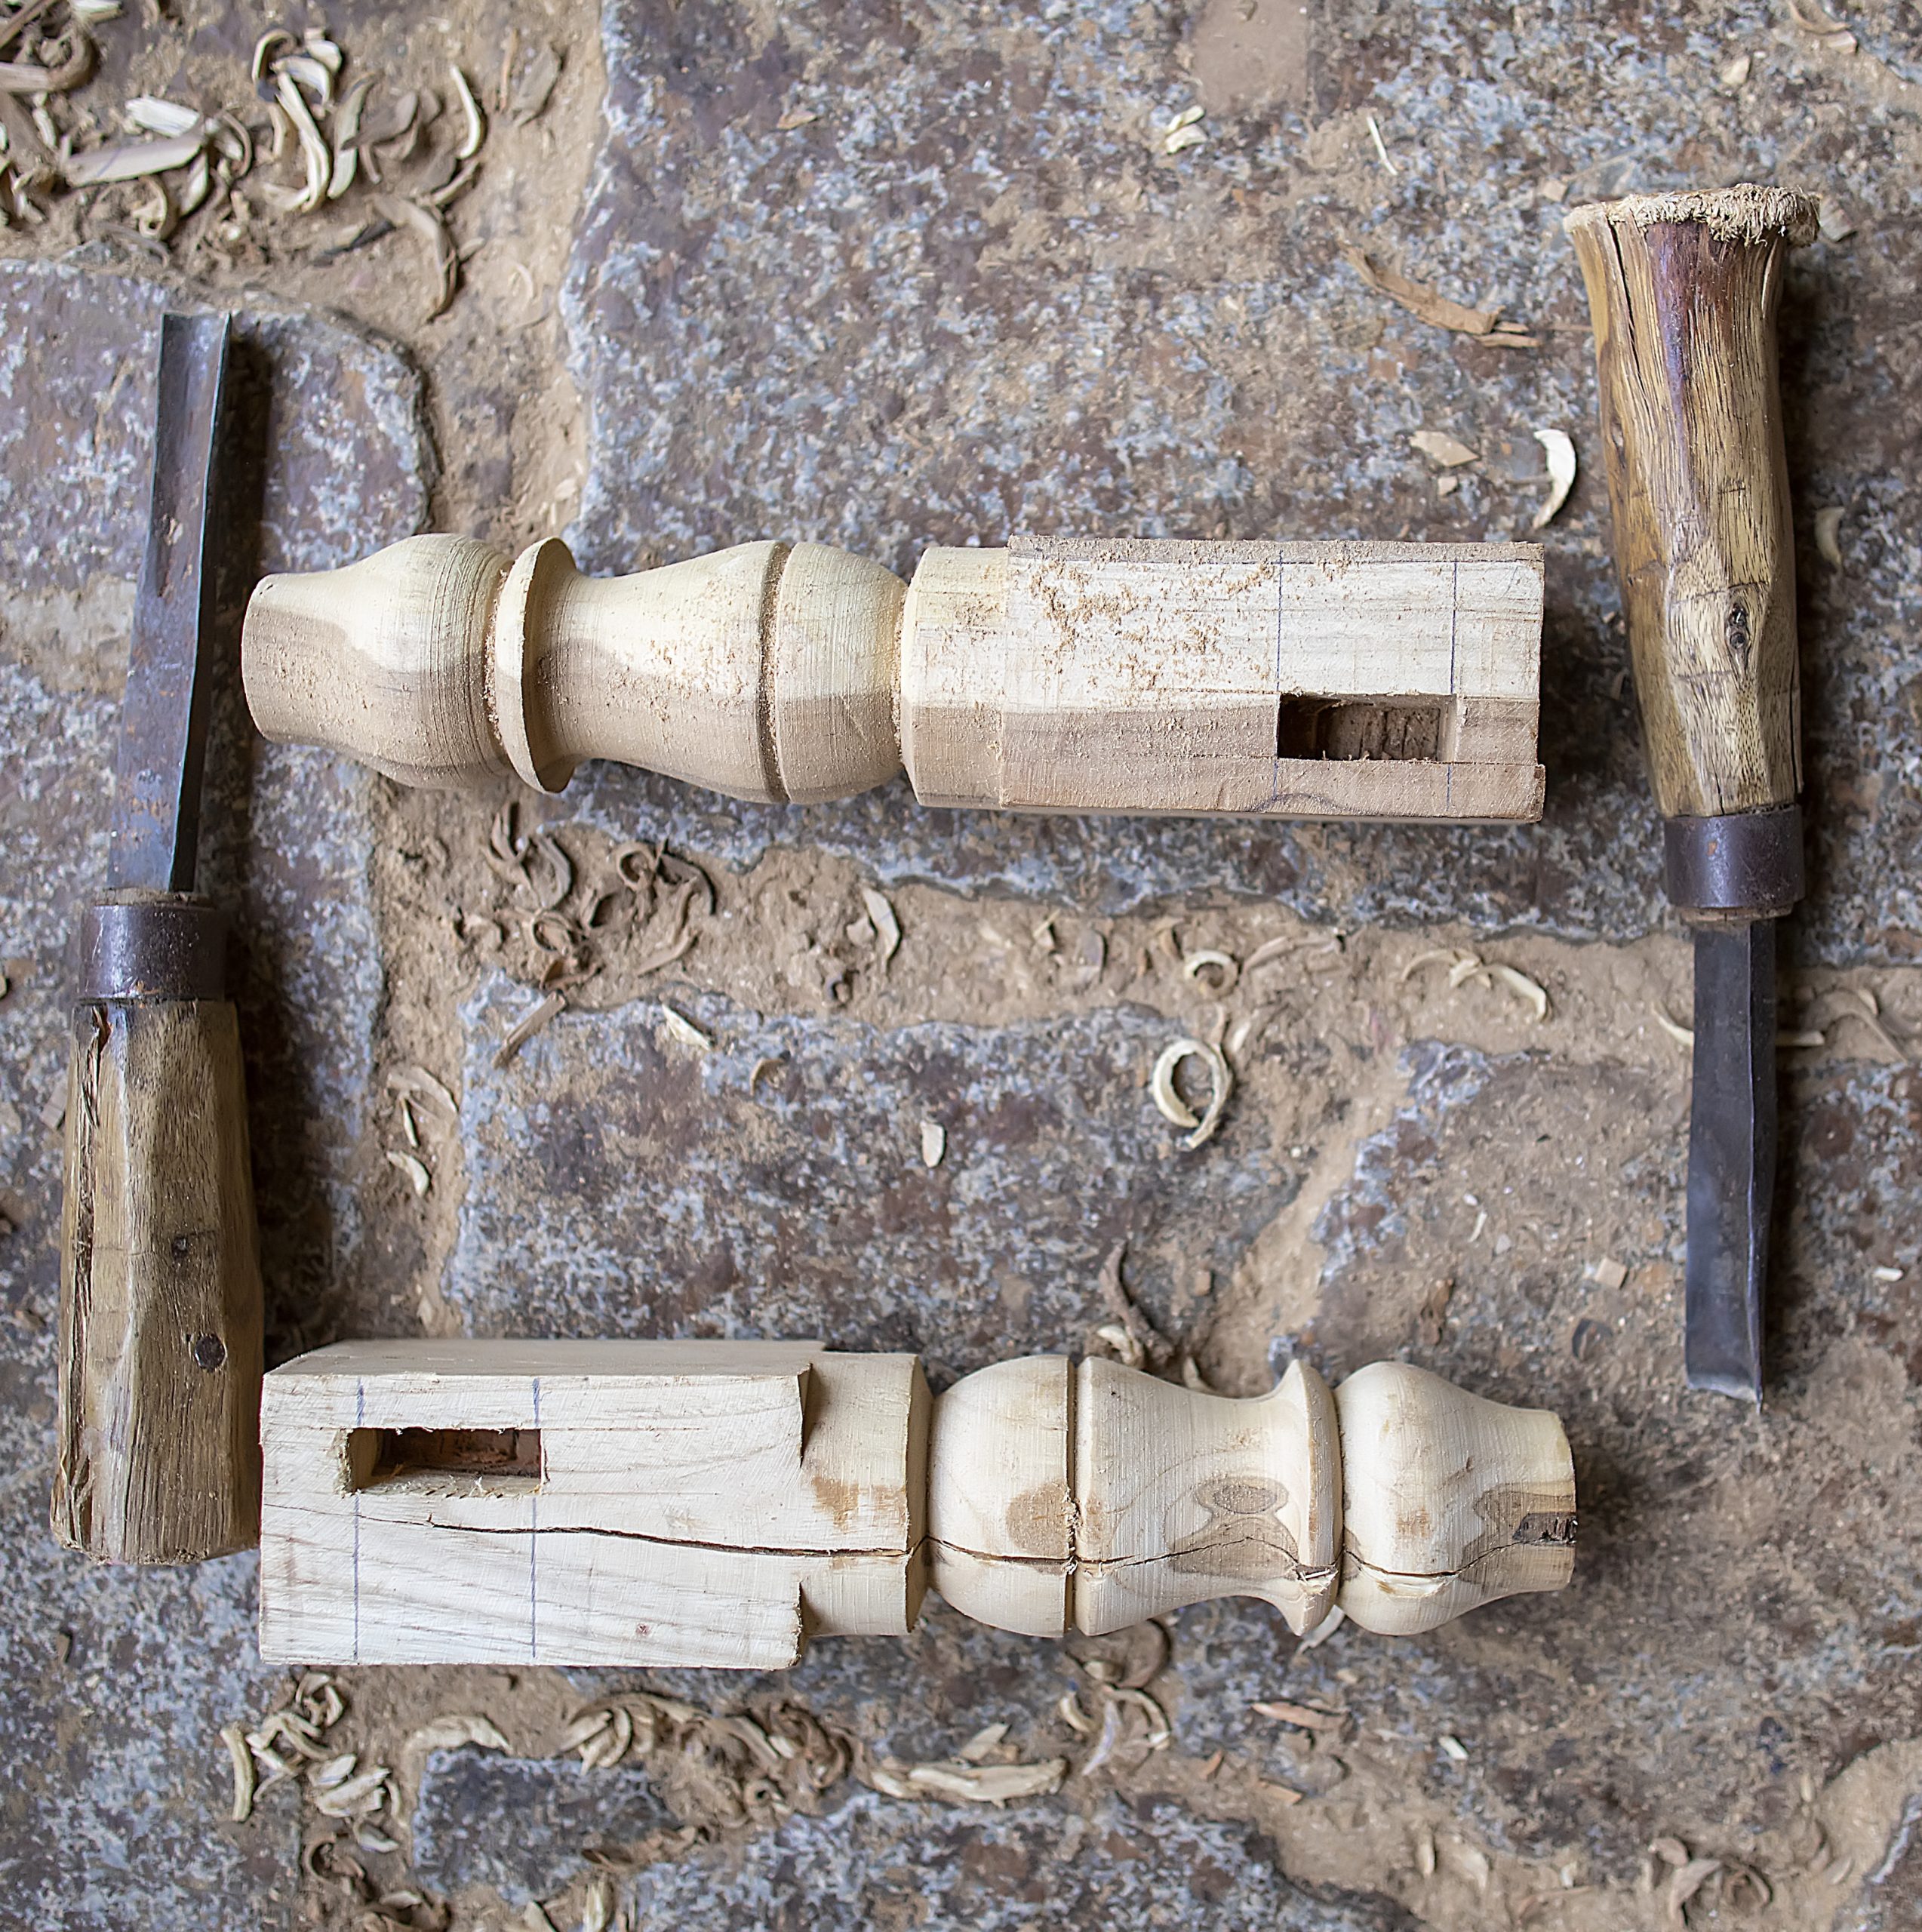 Carpenter tools and wooden pieces